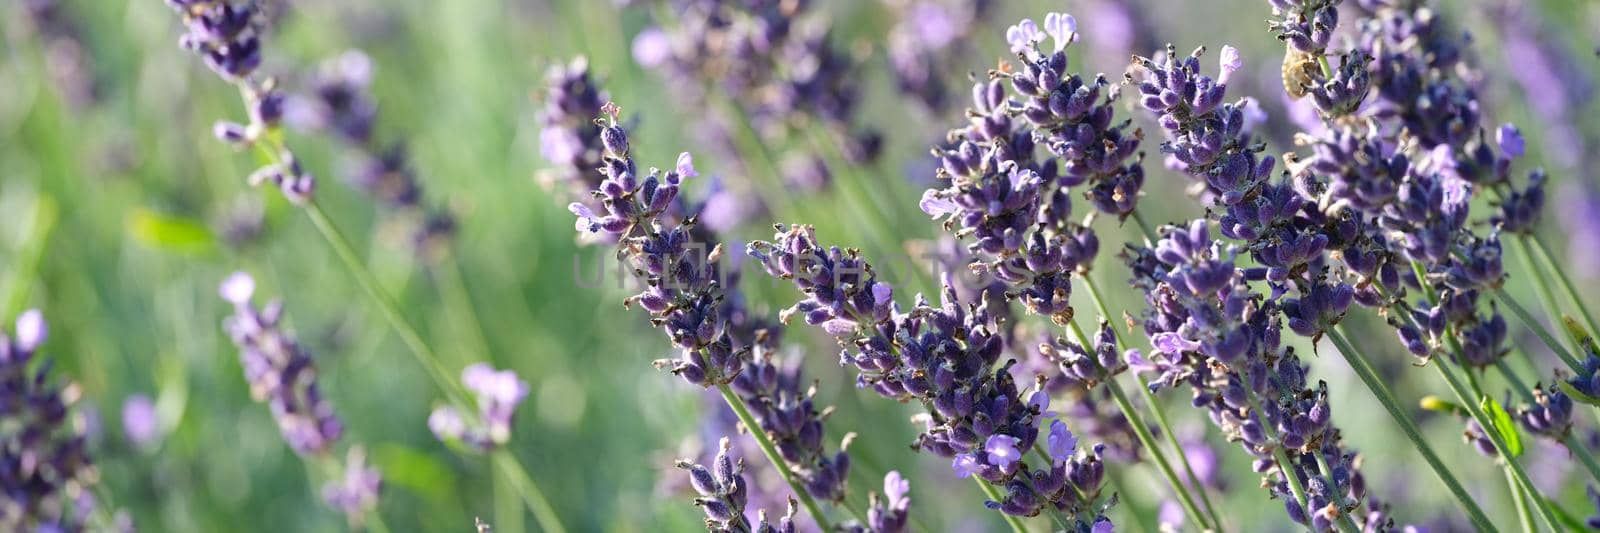 Purple lavender flowers growing on field closeup background by kuprevich